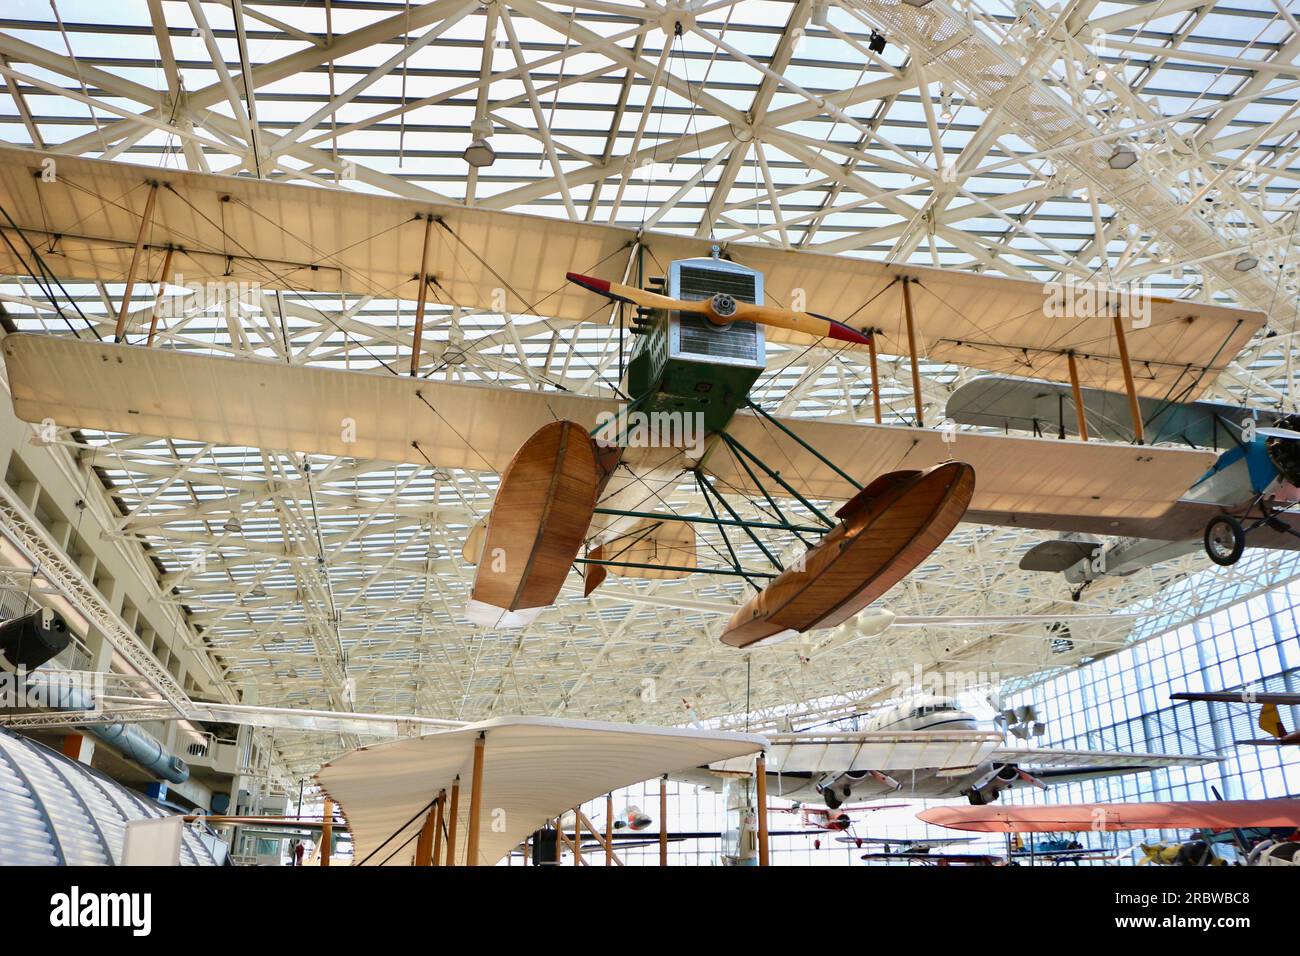 First Boeing aircraft the Boeing B&W Model 1 Replica floatplane suspended in the Great Gallery The Museum of Flight Seattle Washington State USA Stock Photo